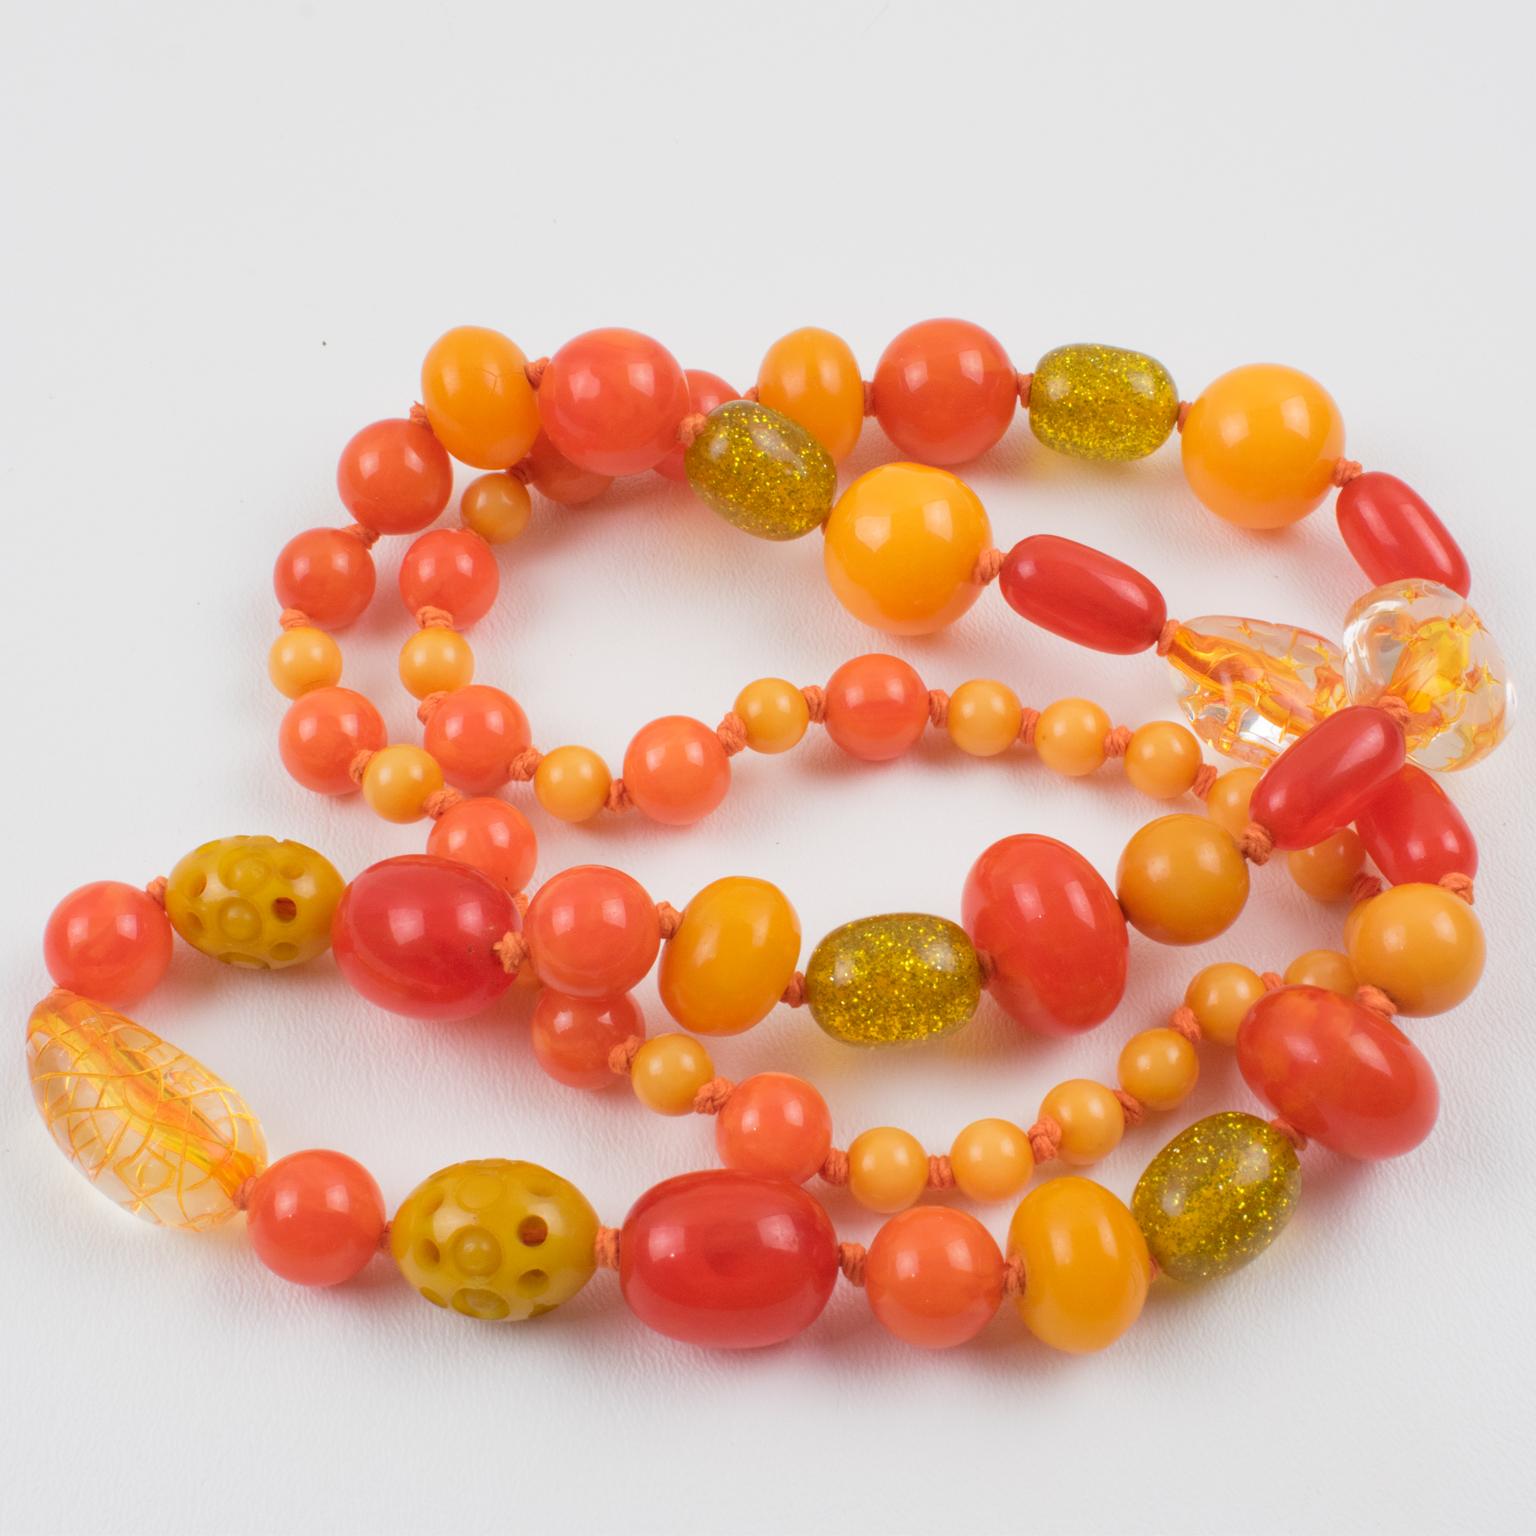 Bakelite and Lucite Long Necklace Sunny Yellow and Orange Colors For Sale 4